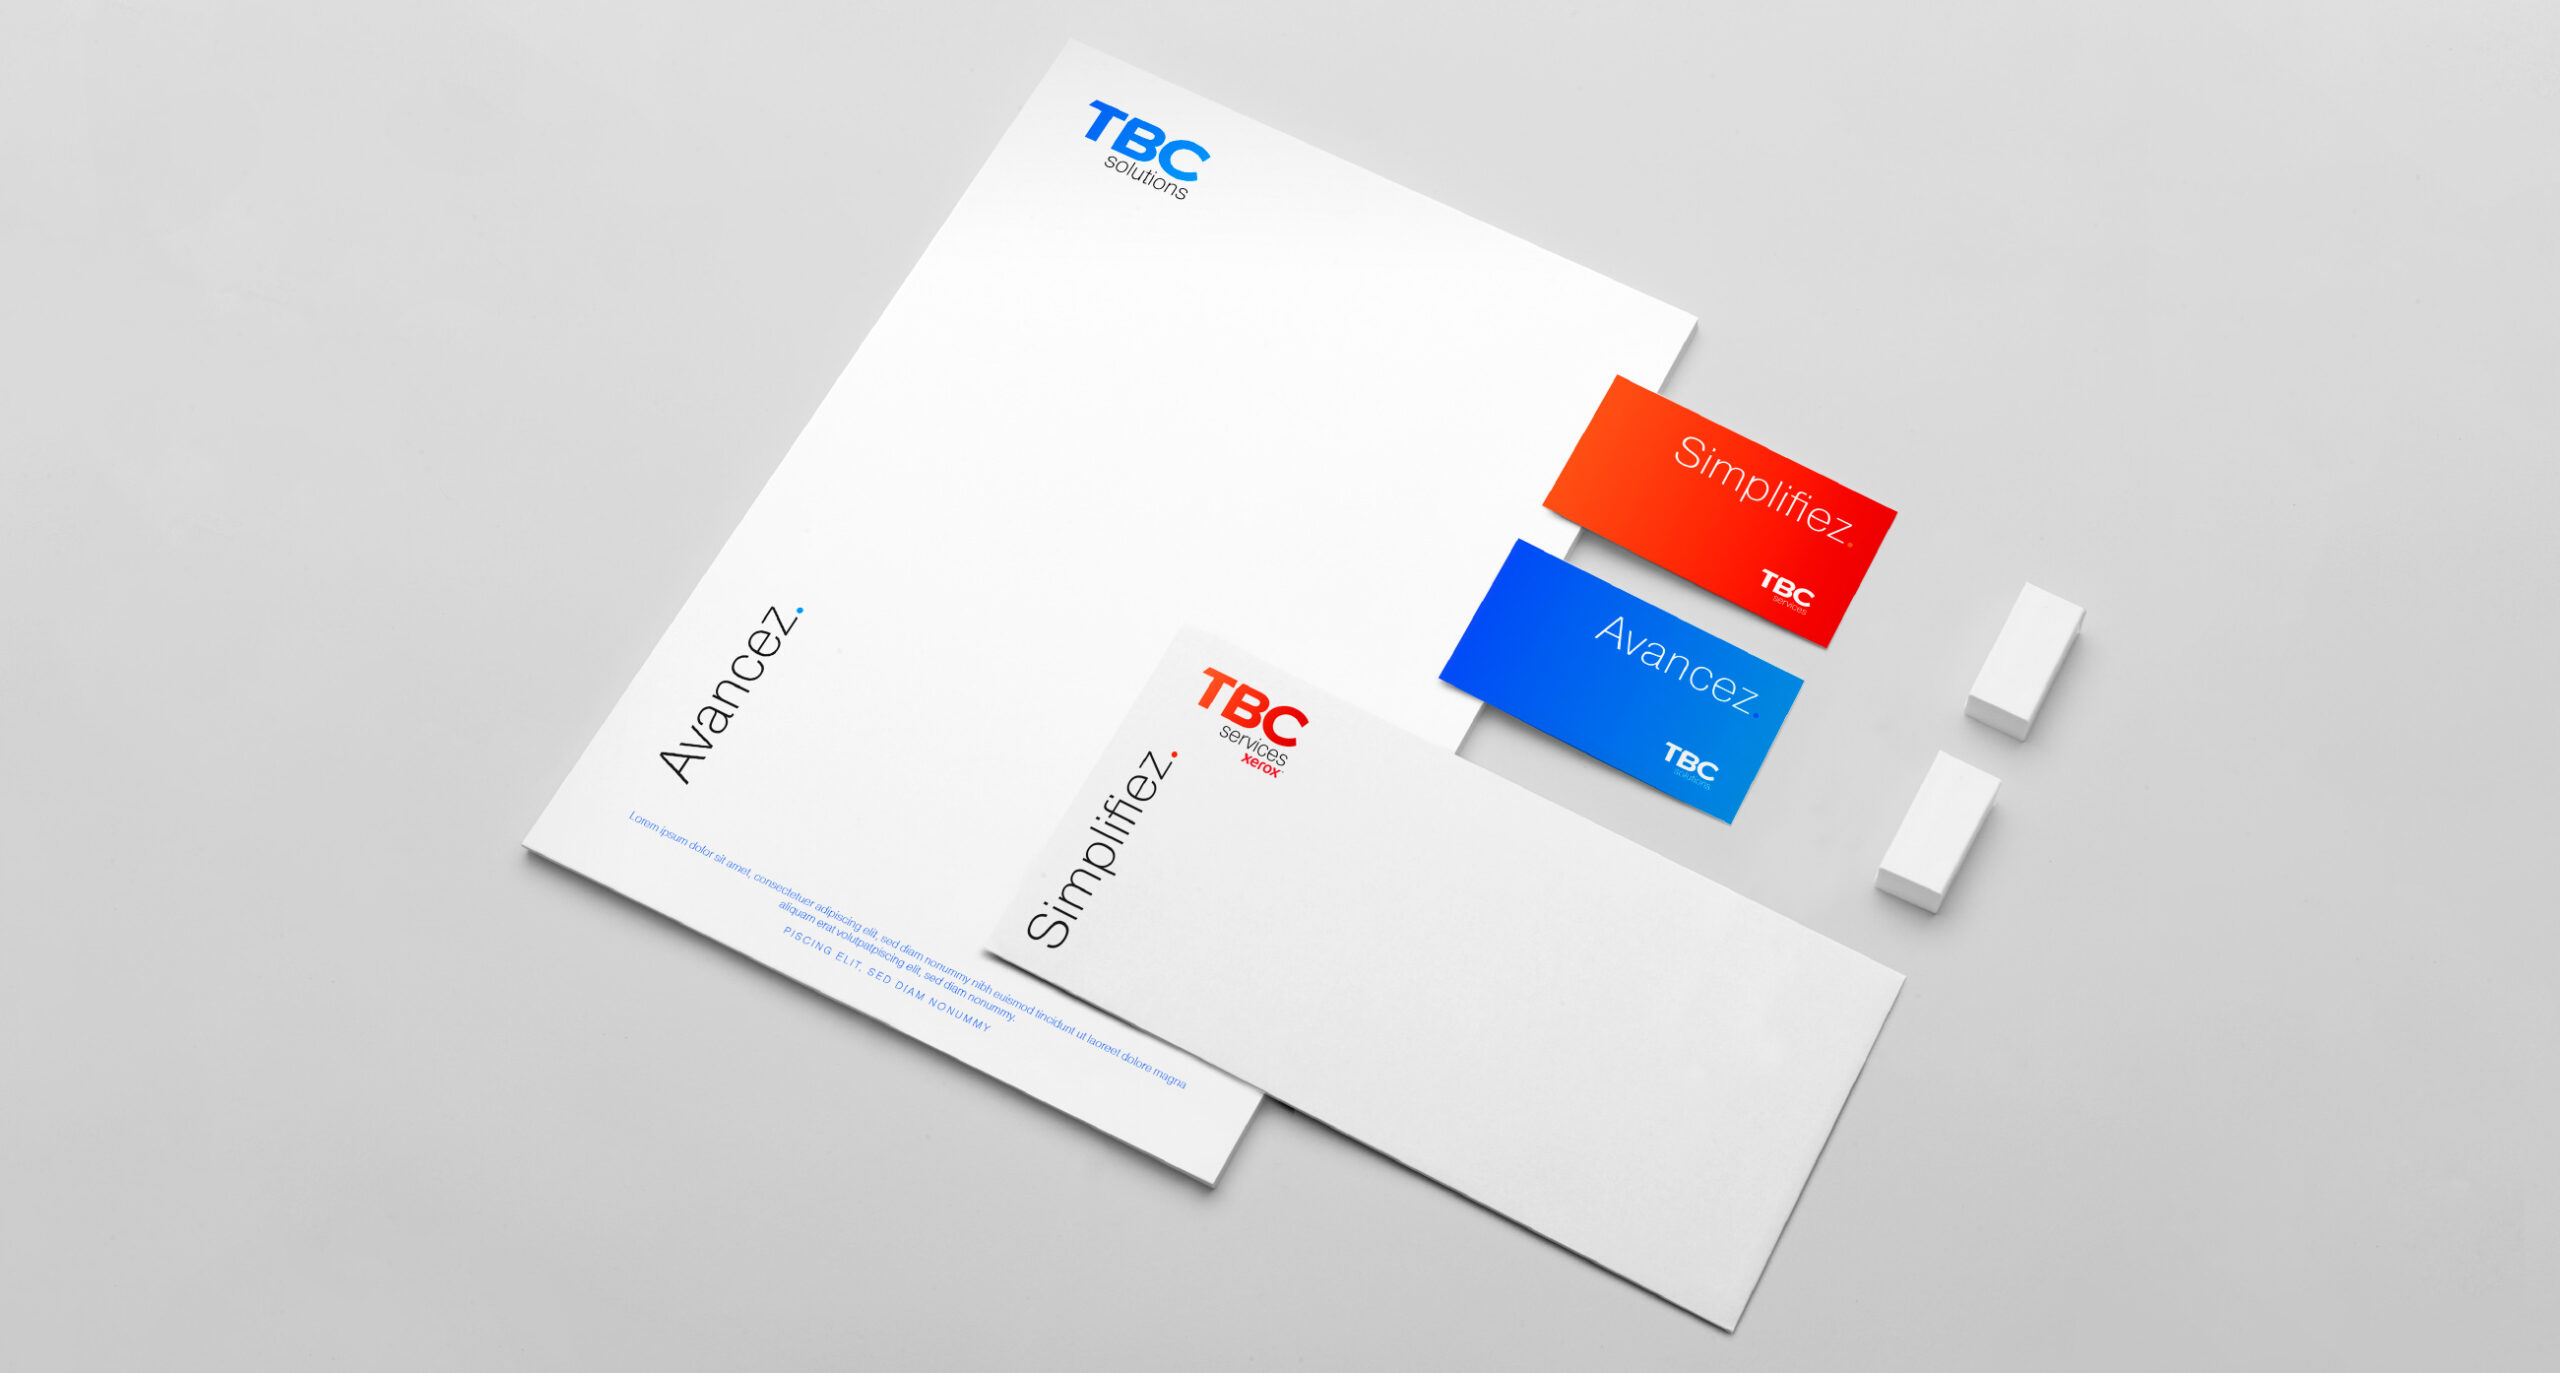 image for TBC solutions & services